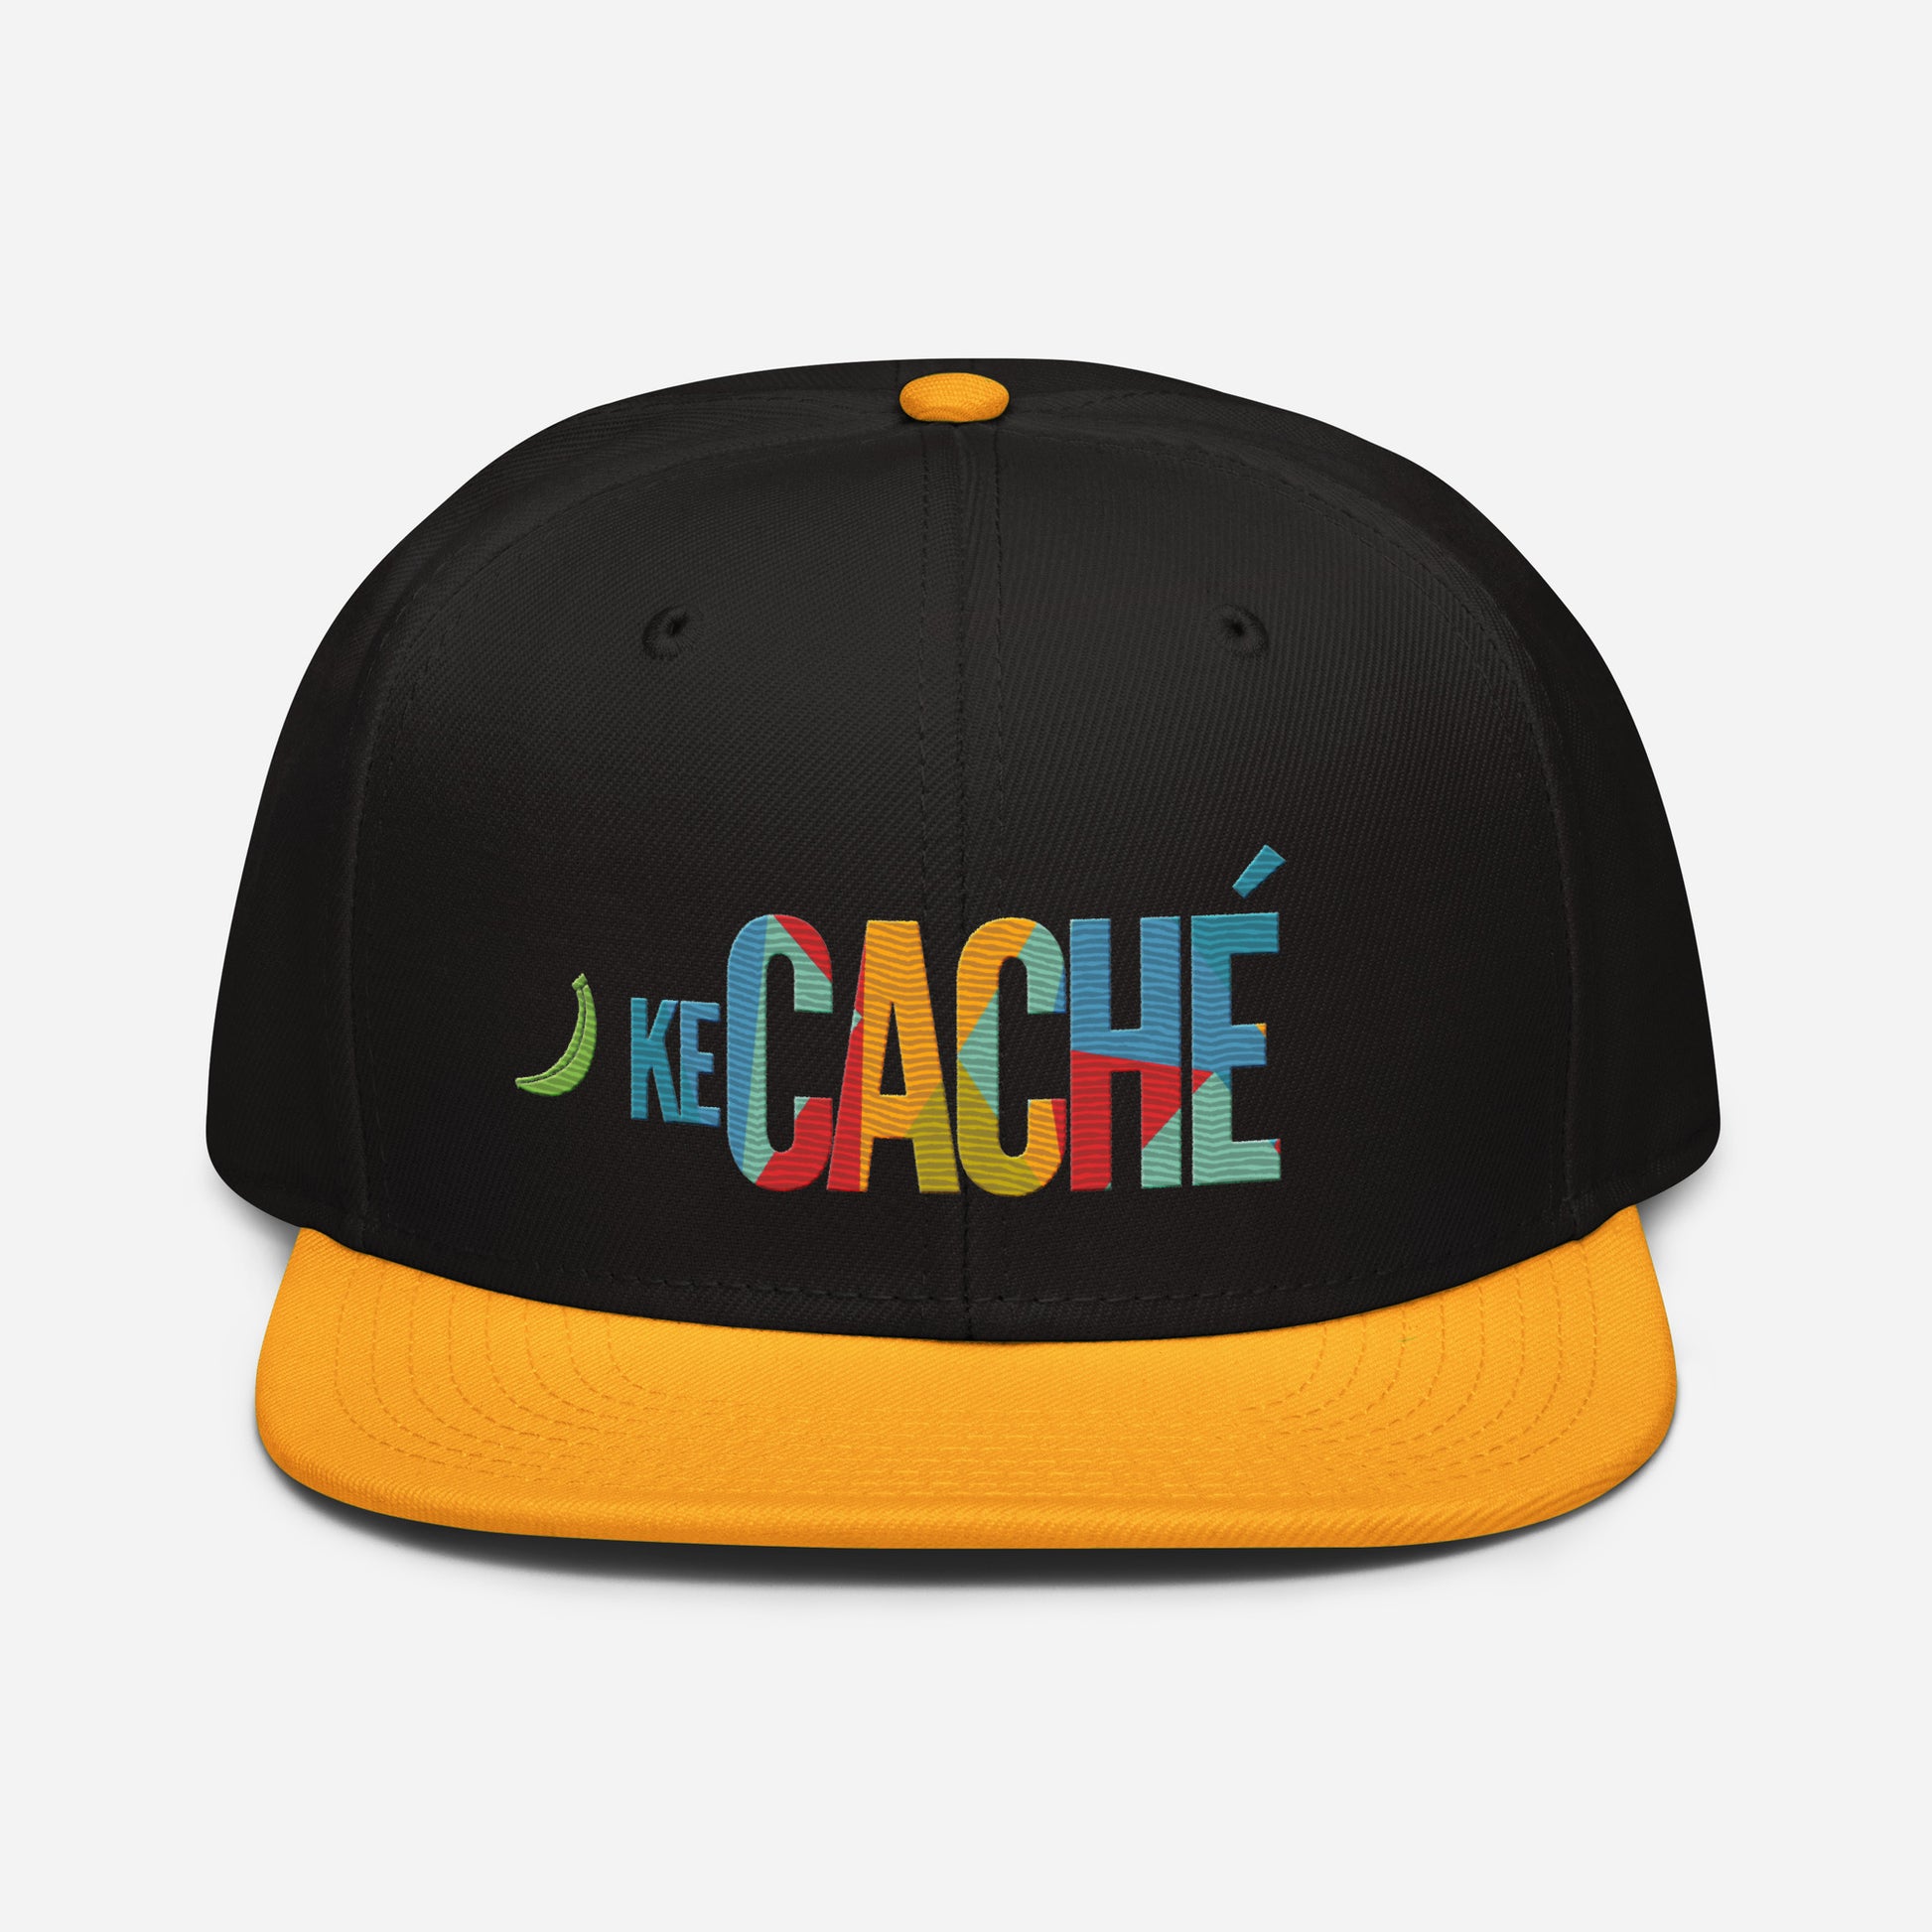  KeCaché Dominican Minimal and Colorful Snapback Hat - Black Yellow